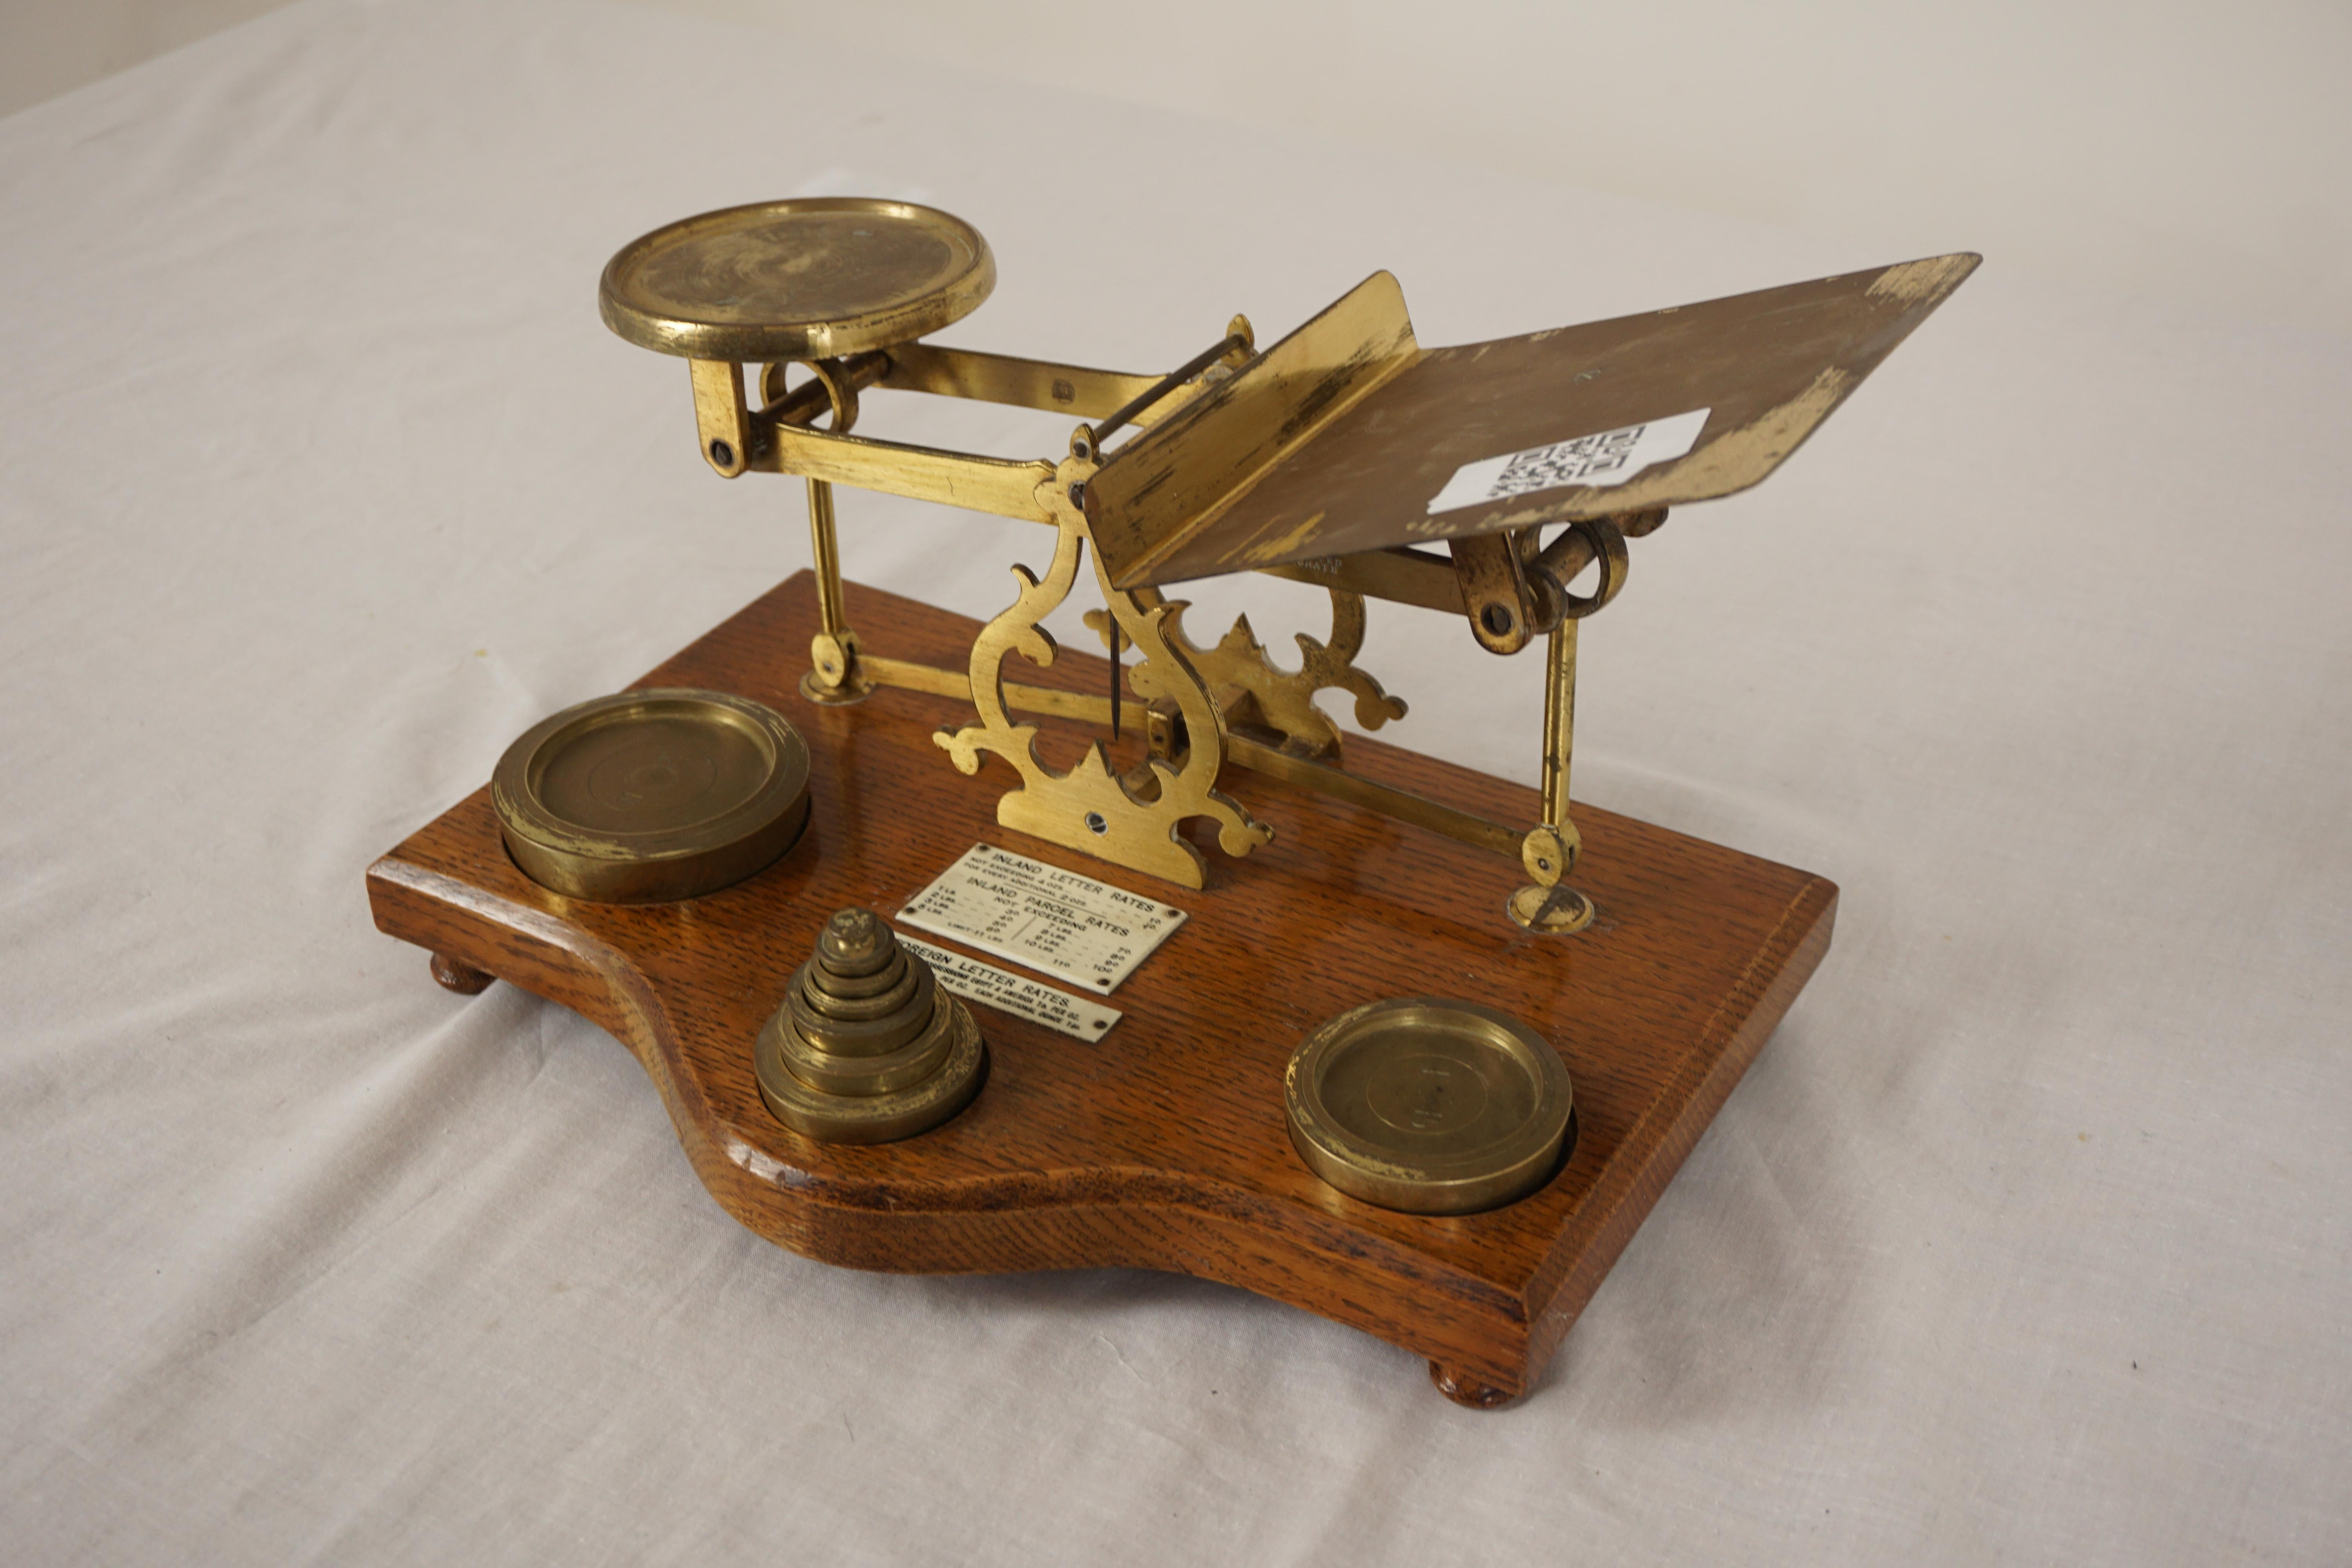 Large Antique Victorian Brass Postal Scales and Weights, Scotland 1900, H977

Scotland 1900
Solid Oak and Brass
The shaped base is solid oak
With the original eight solid brass weights
Inlaid letter rates applied to the base
Two pens on